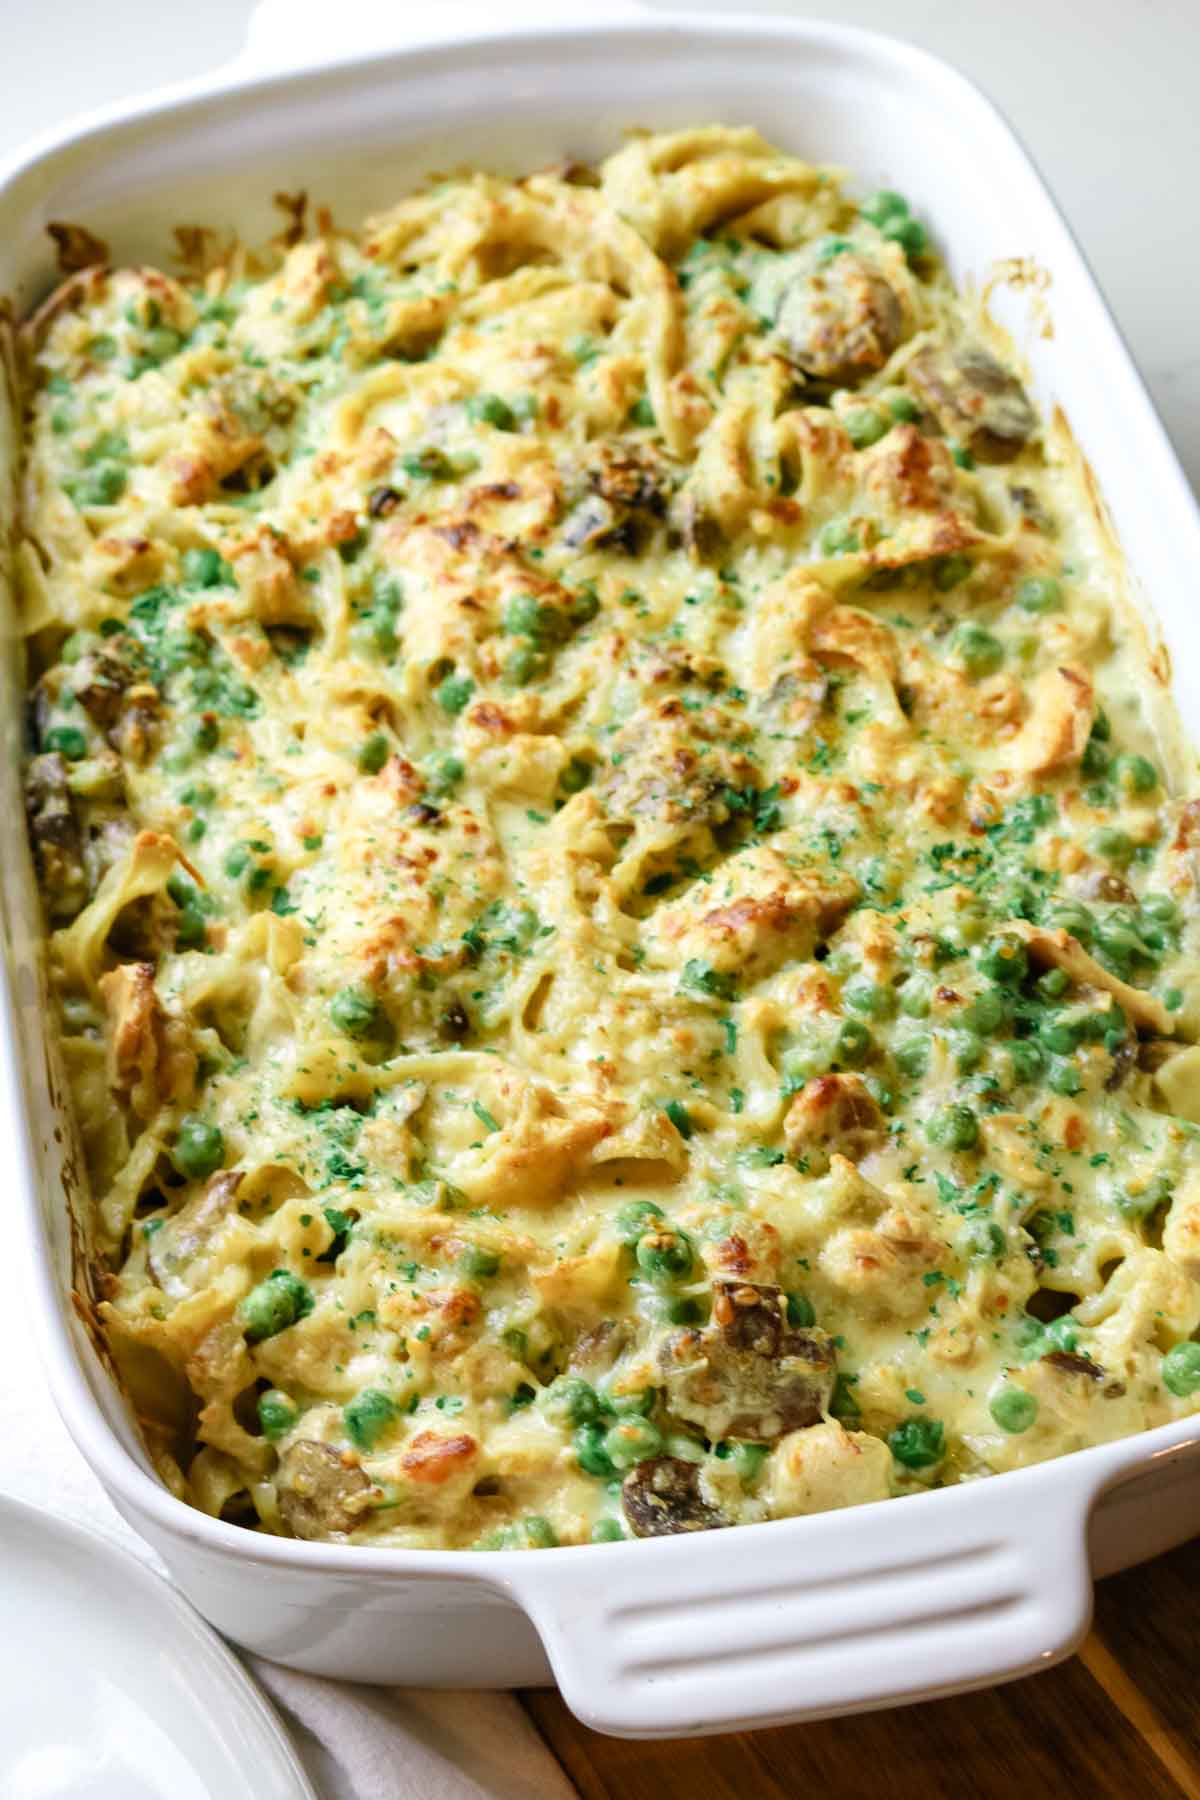 tuna casserole with noodles and peas in white casserole dish.